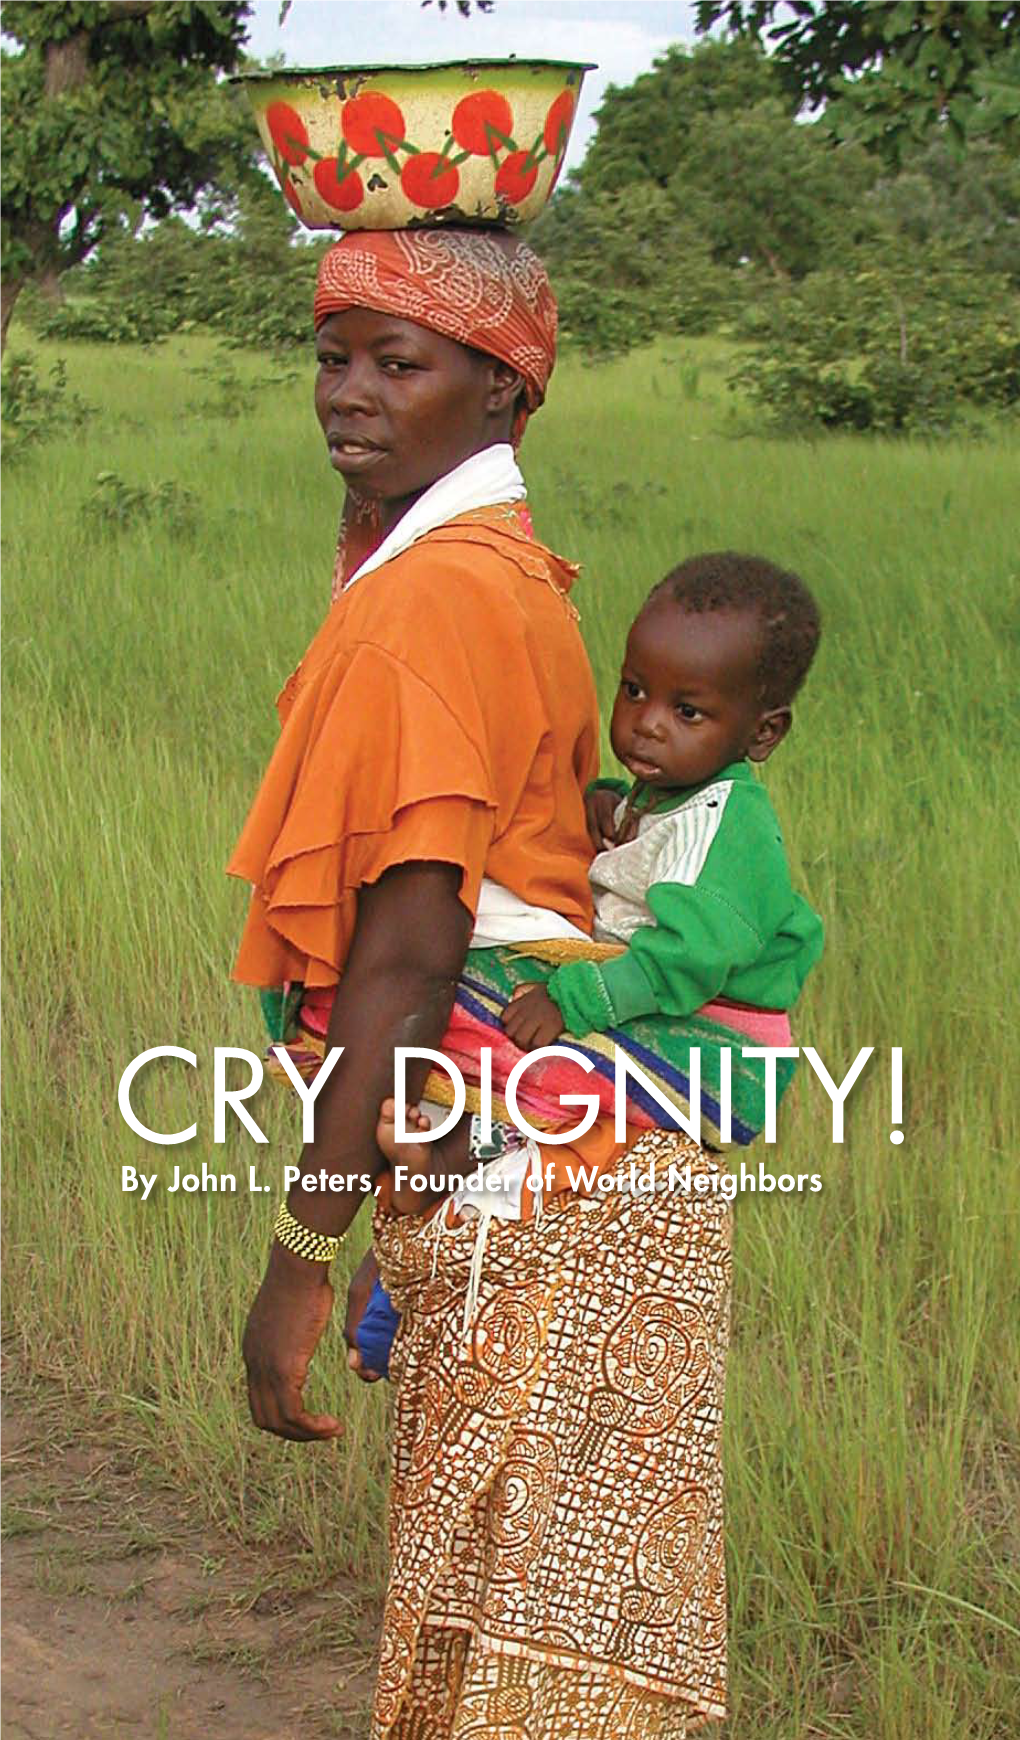 Cry Dignity! by John L